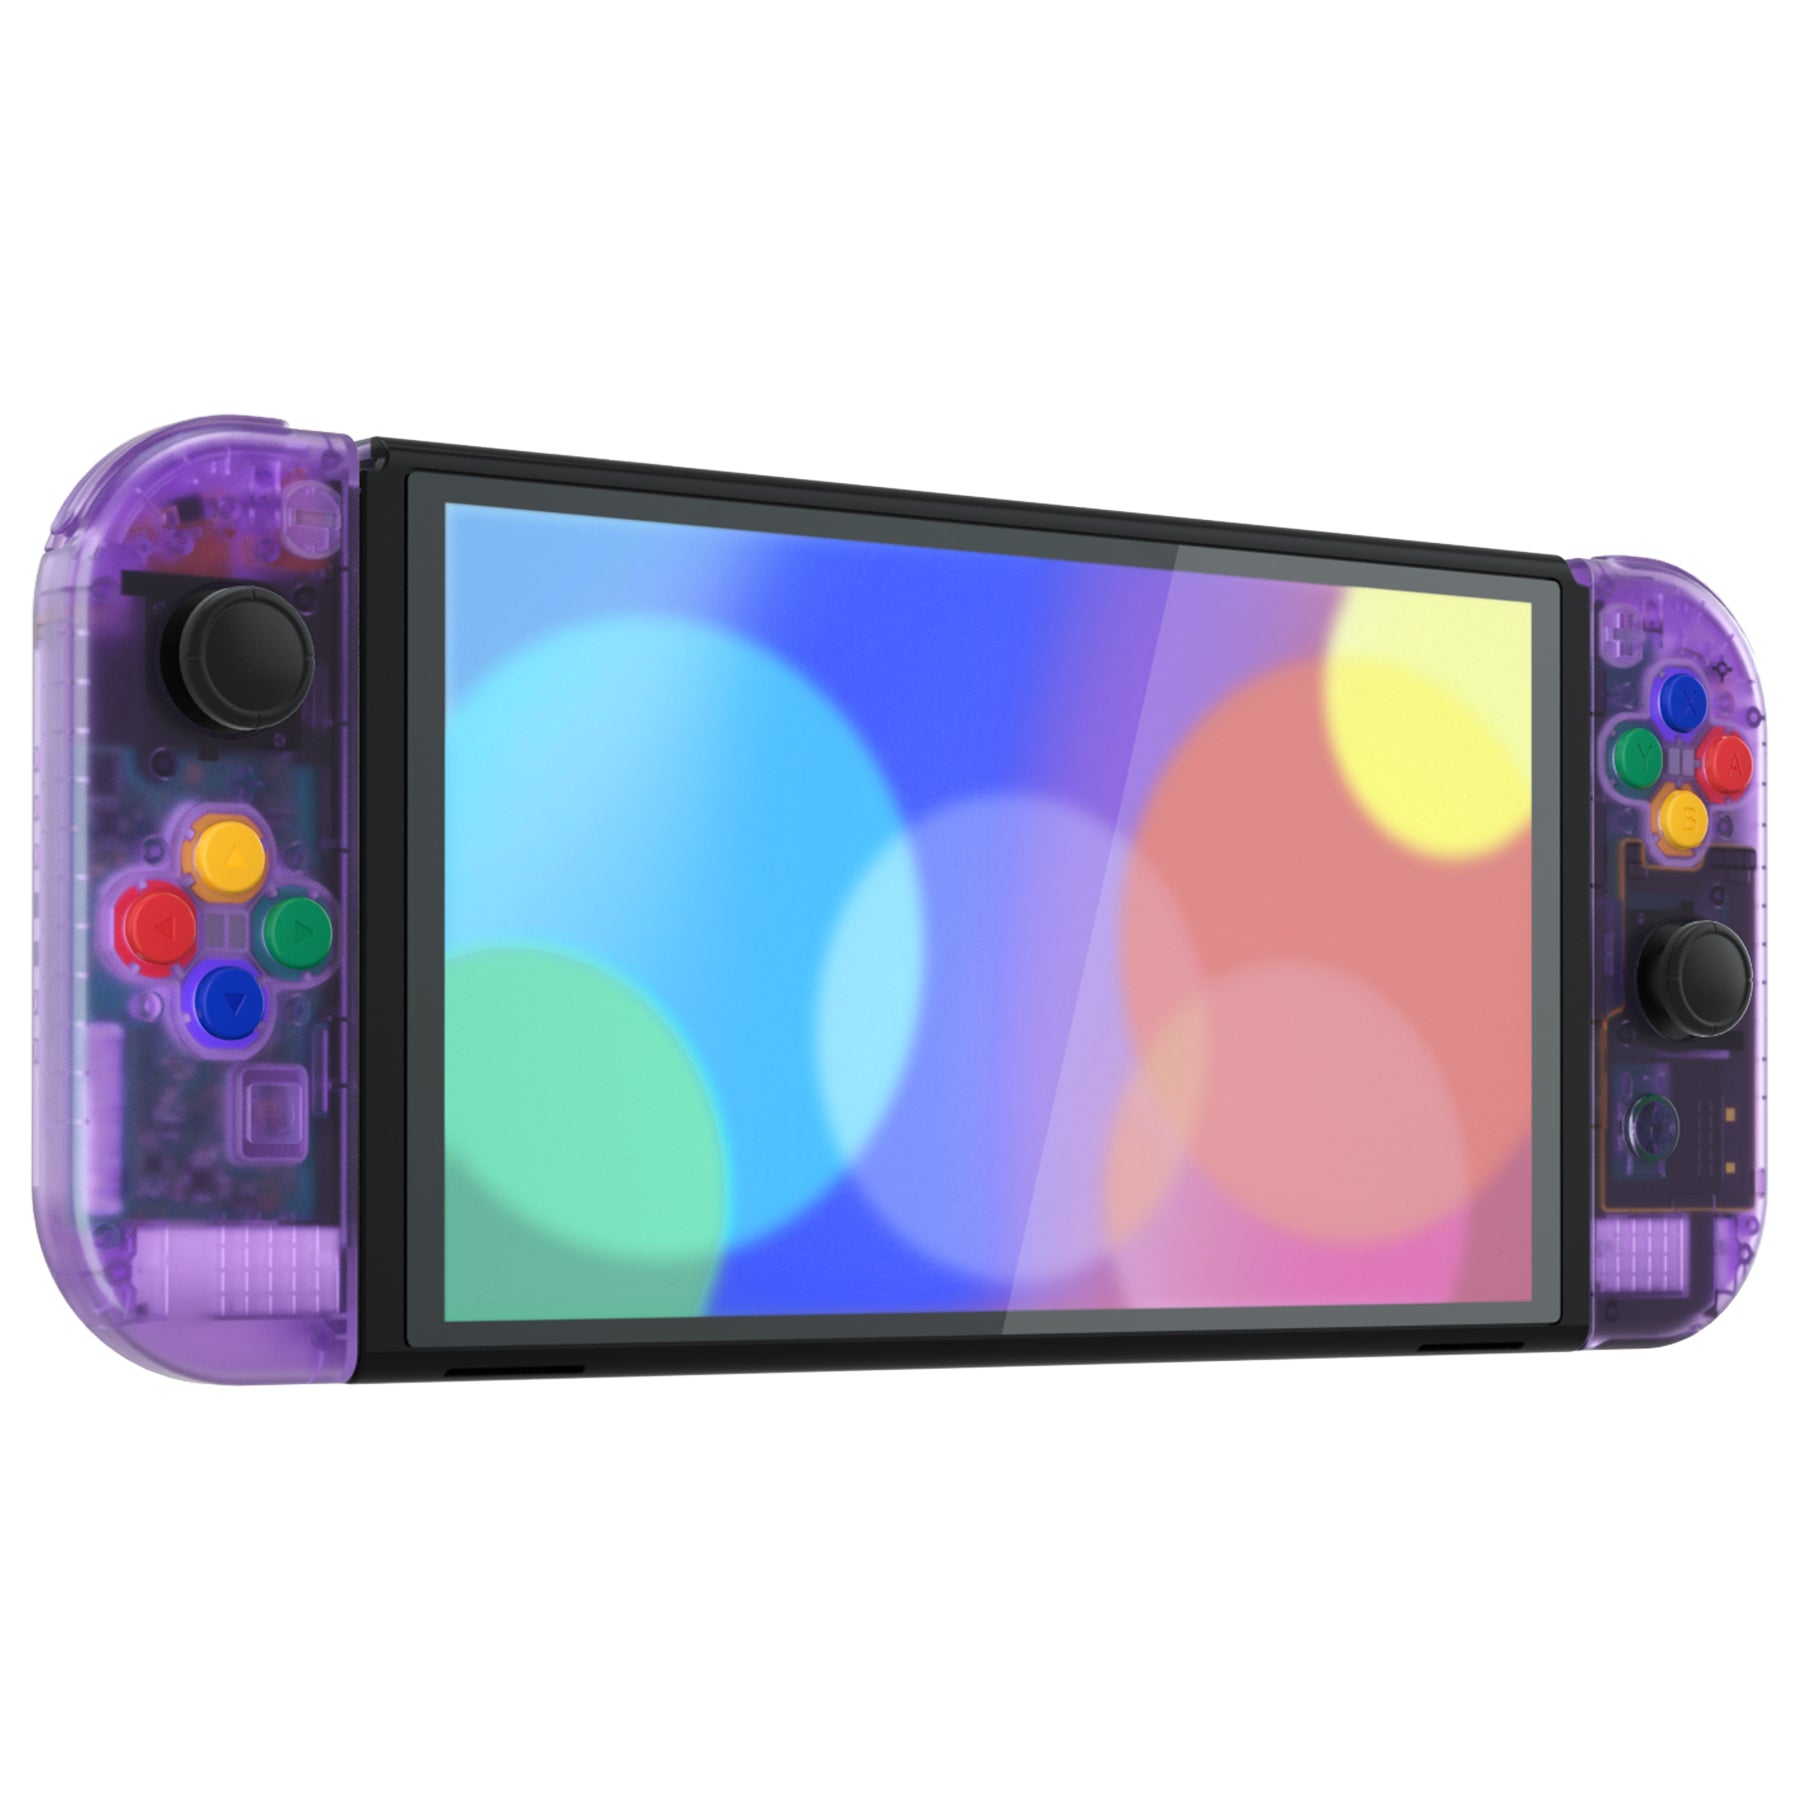 eXtremeRate Custom Replacement Full Set Shell with Buttons for Nintendo  Switch OLED - Clear Atomic Purple